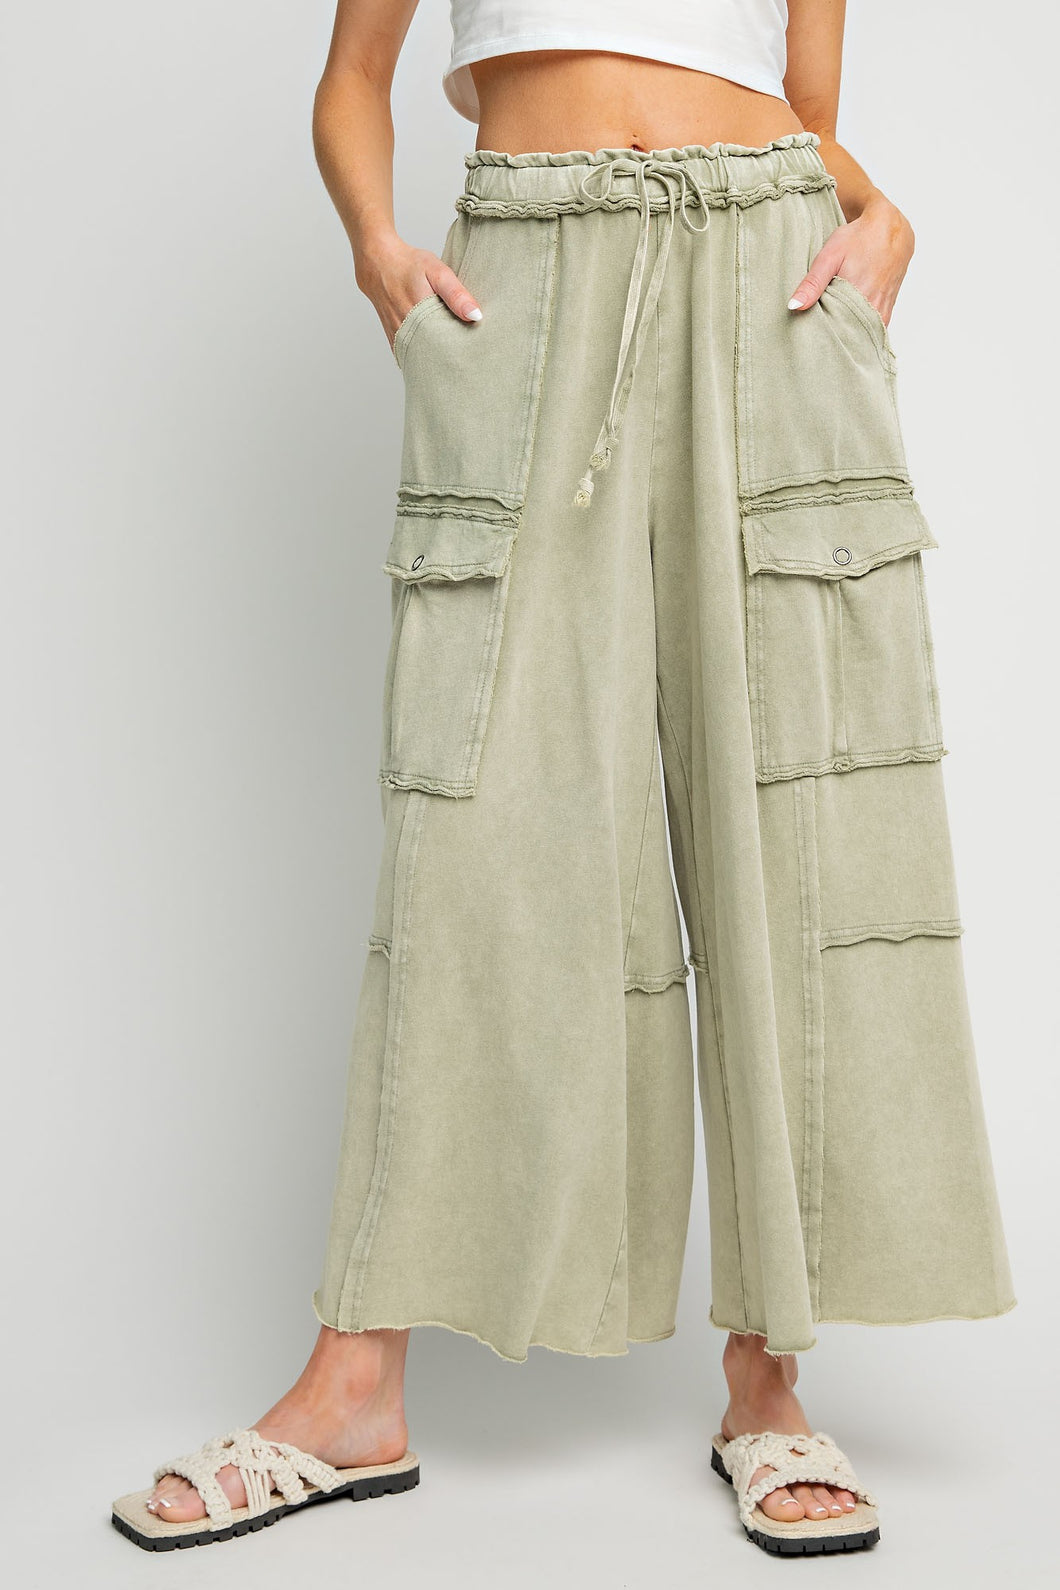 Easel Feeling Good Mineral Washed Utility Pants in Faded Olive Pants Easel   